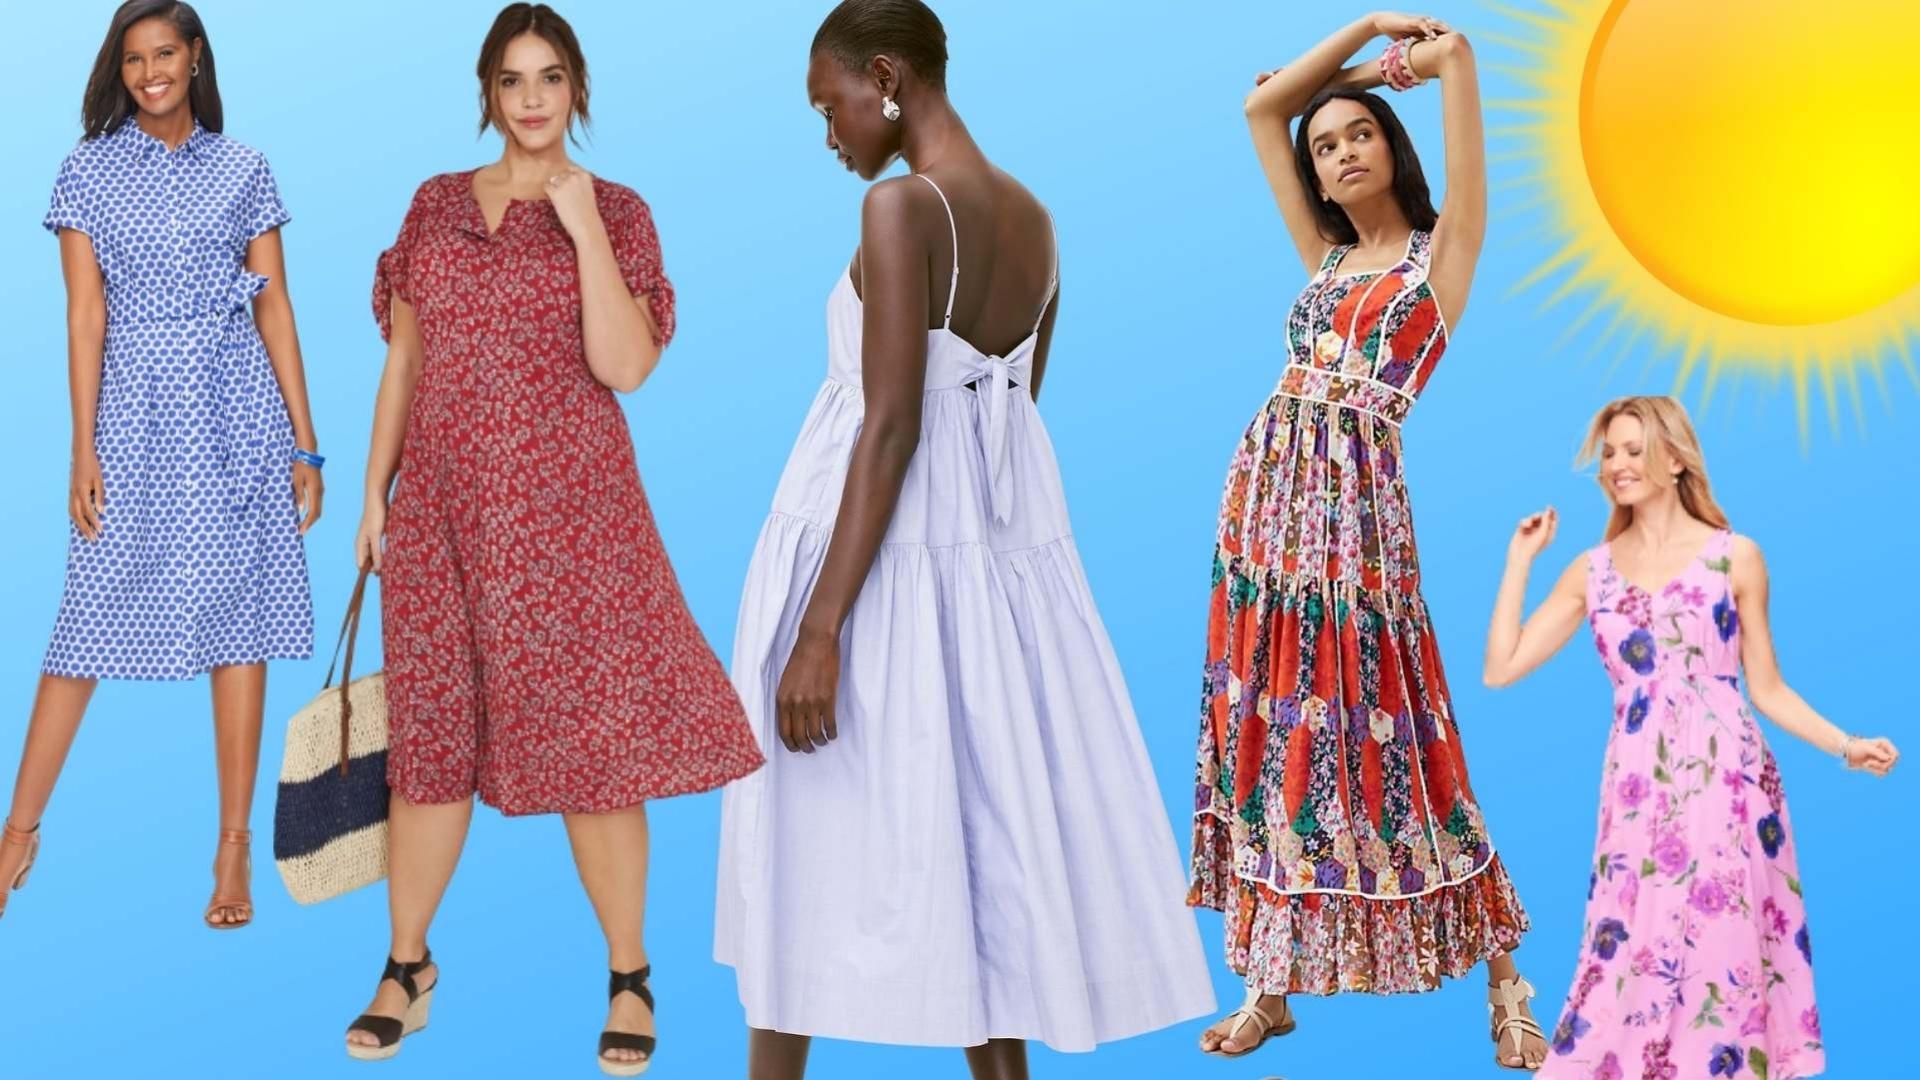 casual long summer dresses,elegant long summer dresses,summer long sundress,summer dresses for women over 50,sundress summer dress patterns,summer dresses for women,sundresses,sundresses for women,cotton summer dresses for over 50s,summer dresses with sleeves,